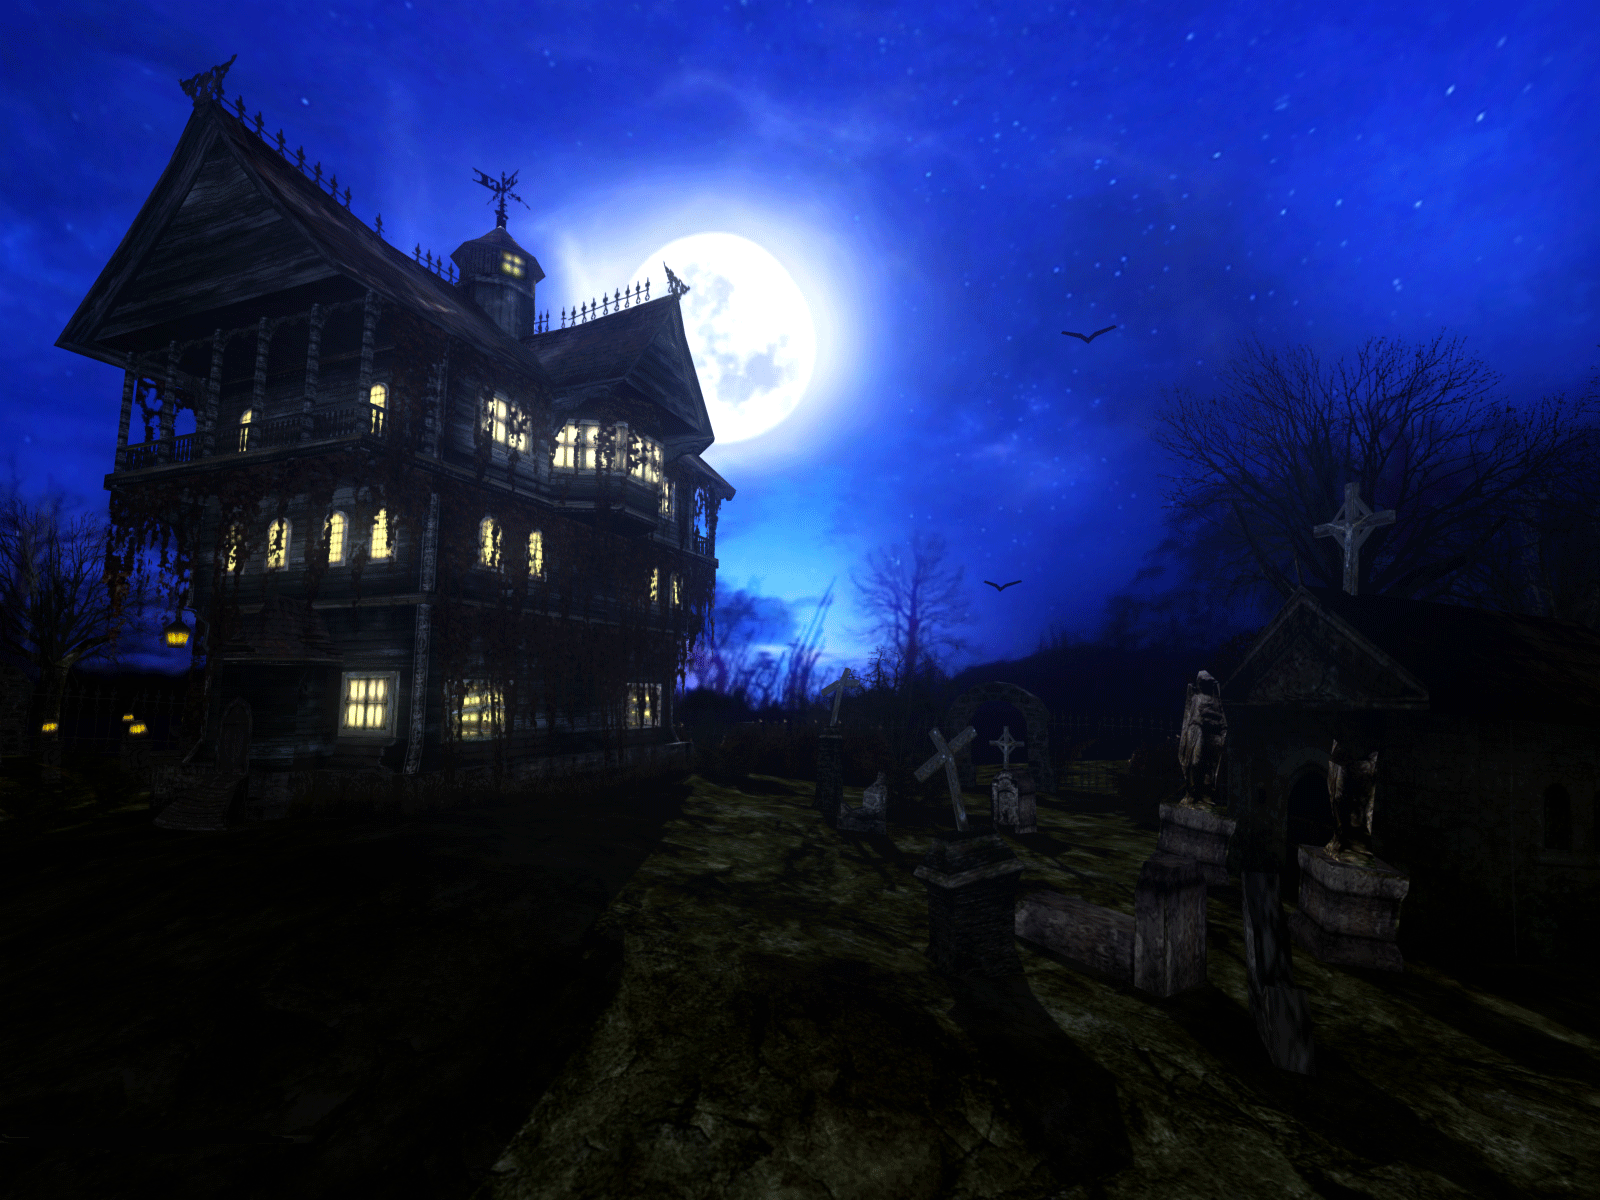 Haunted House Wallpapers Harvest Time Desktops free